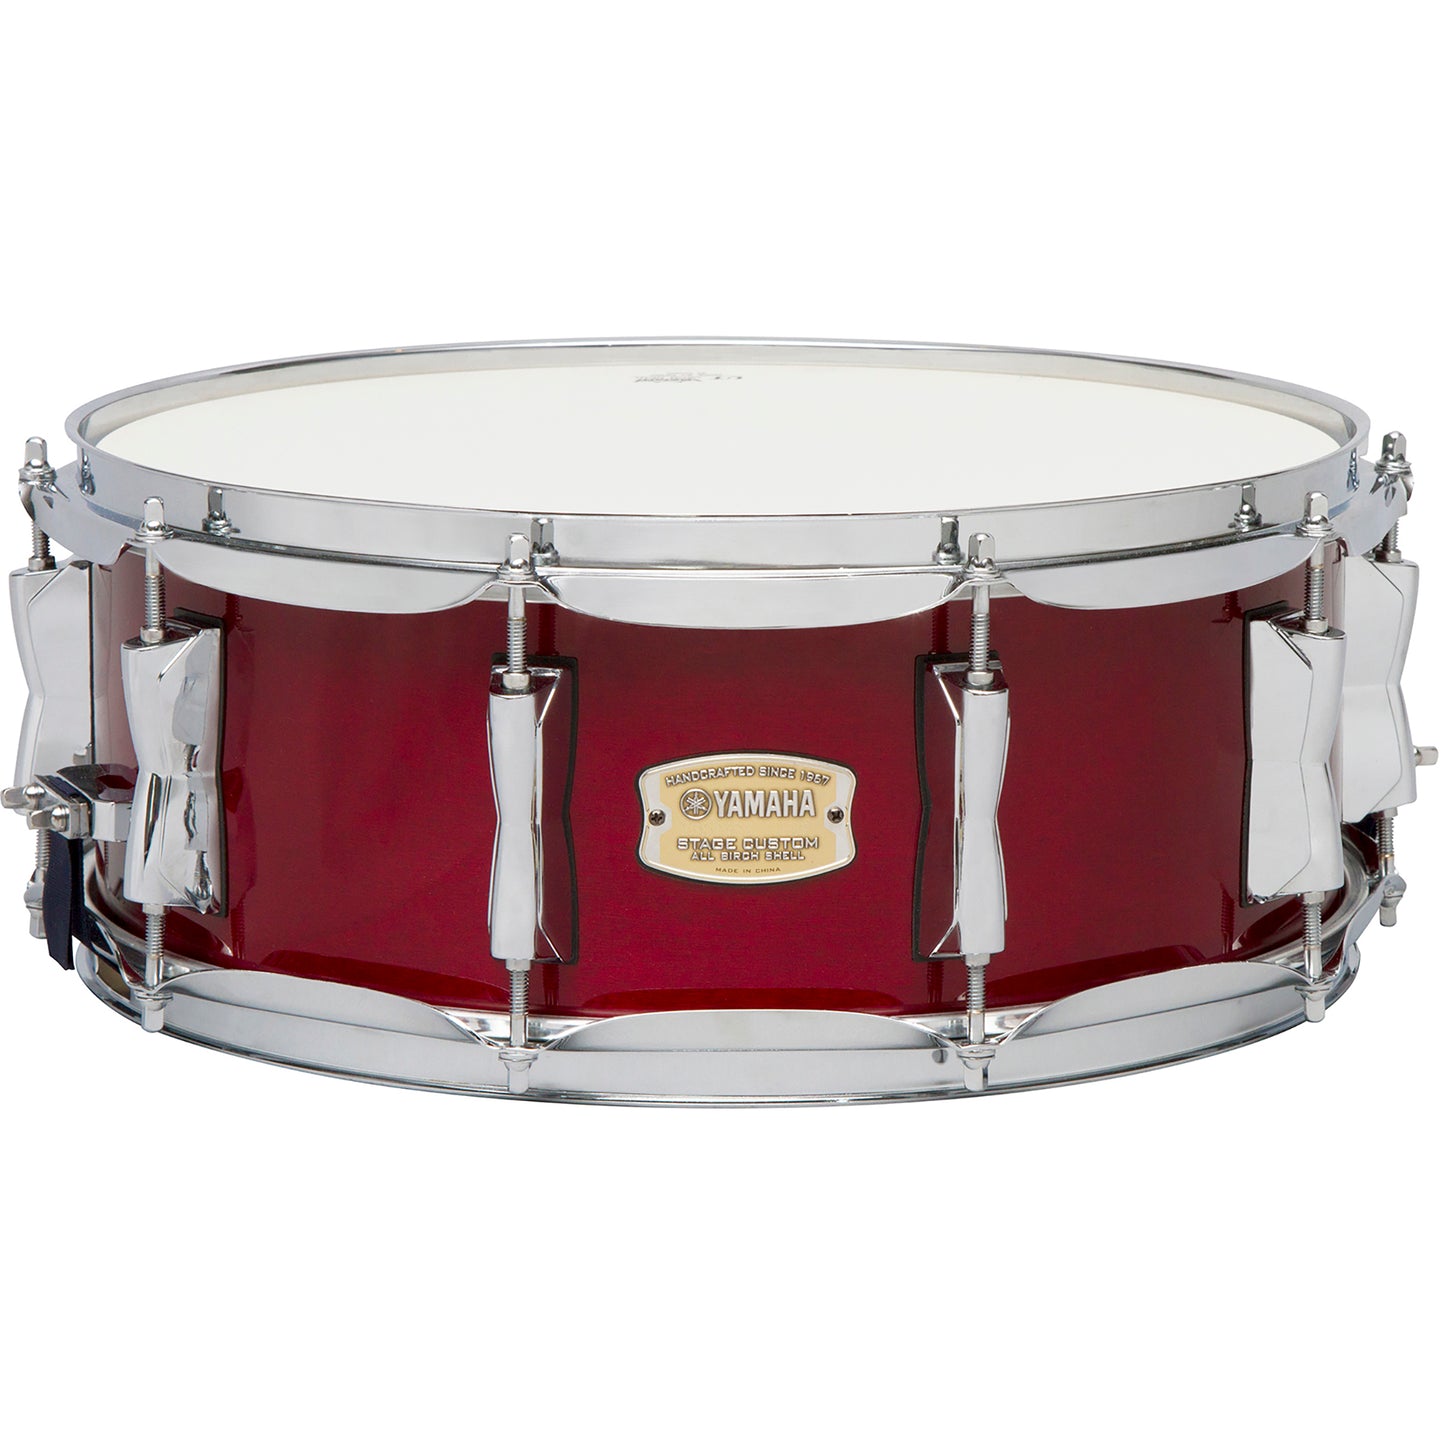 Yamaha Stage Custom Birch 14x5.5 Snare Drum, Cranberry Red